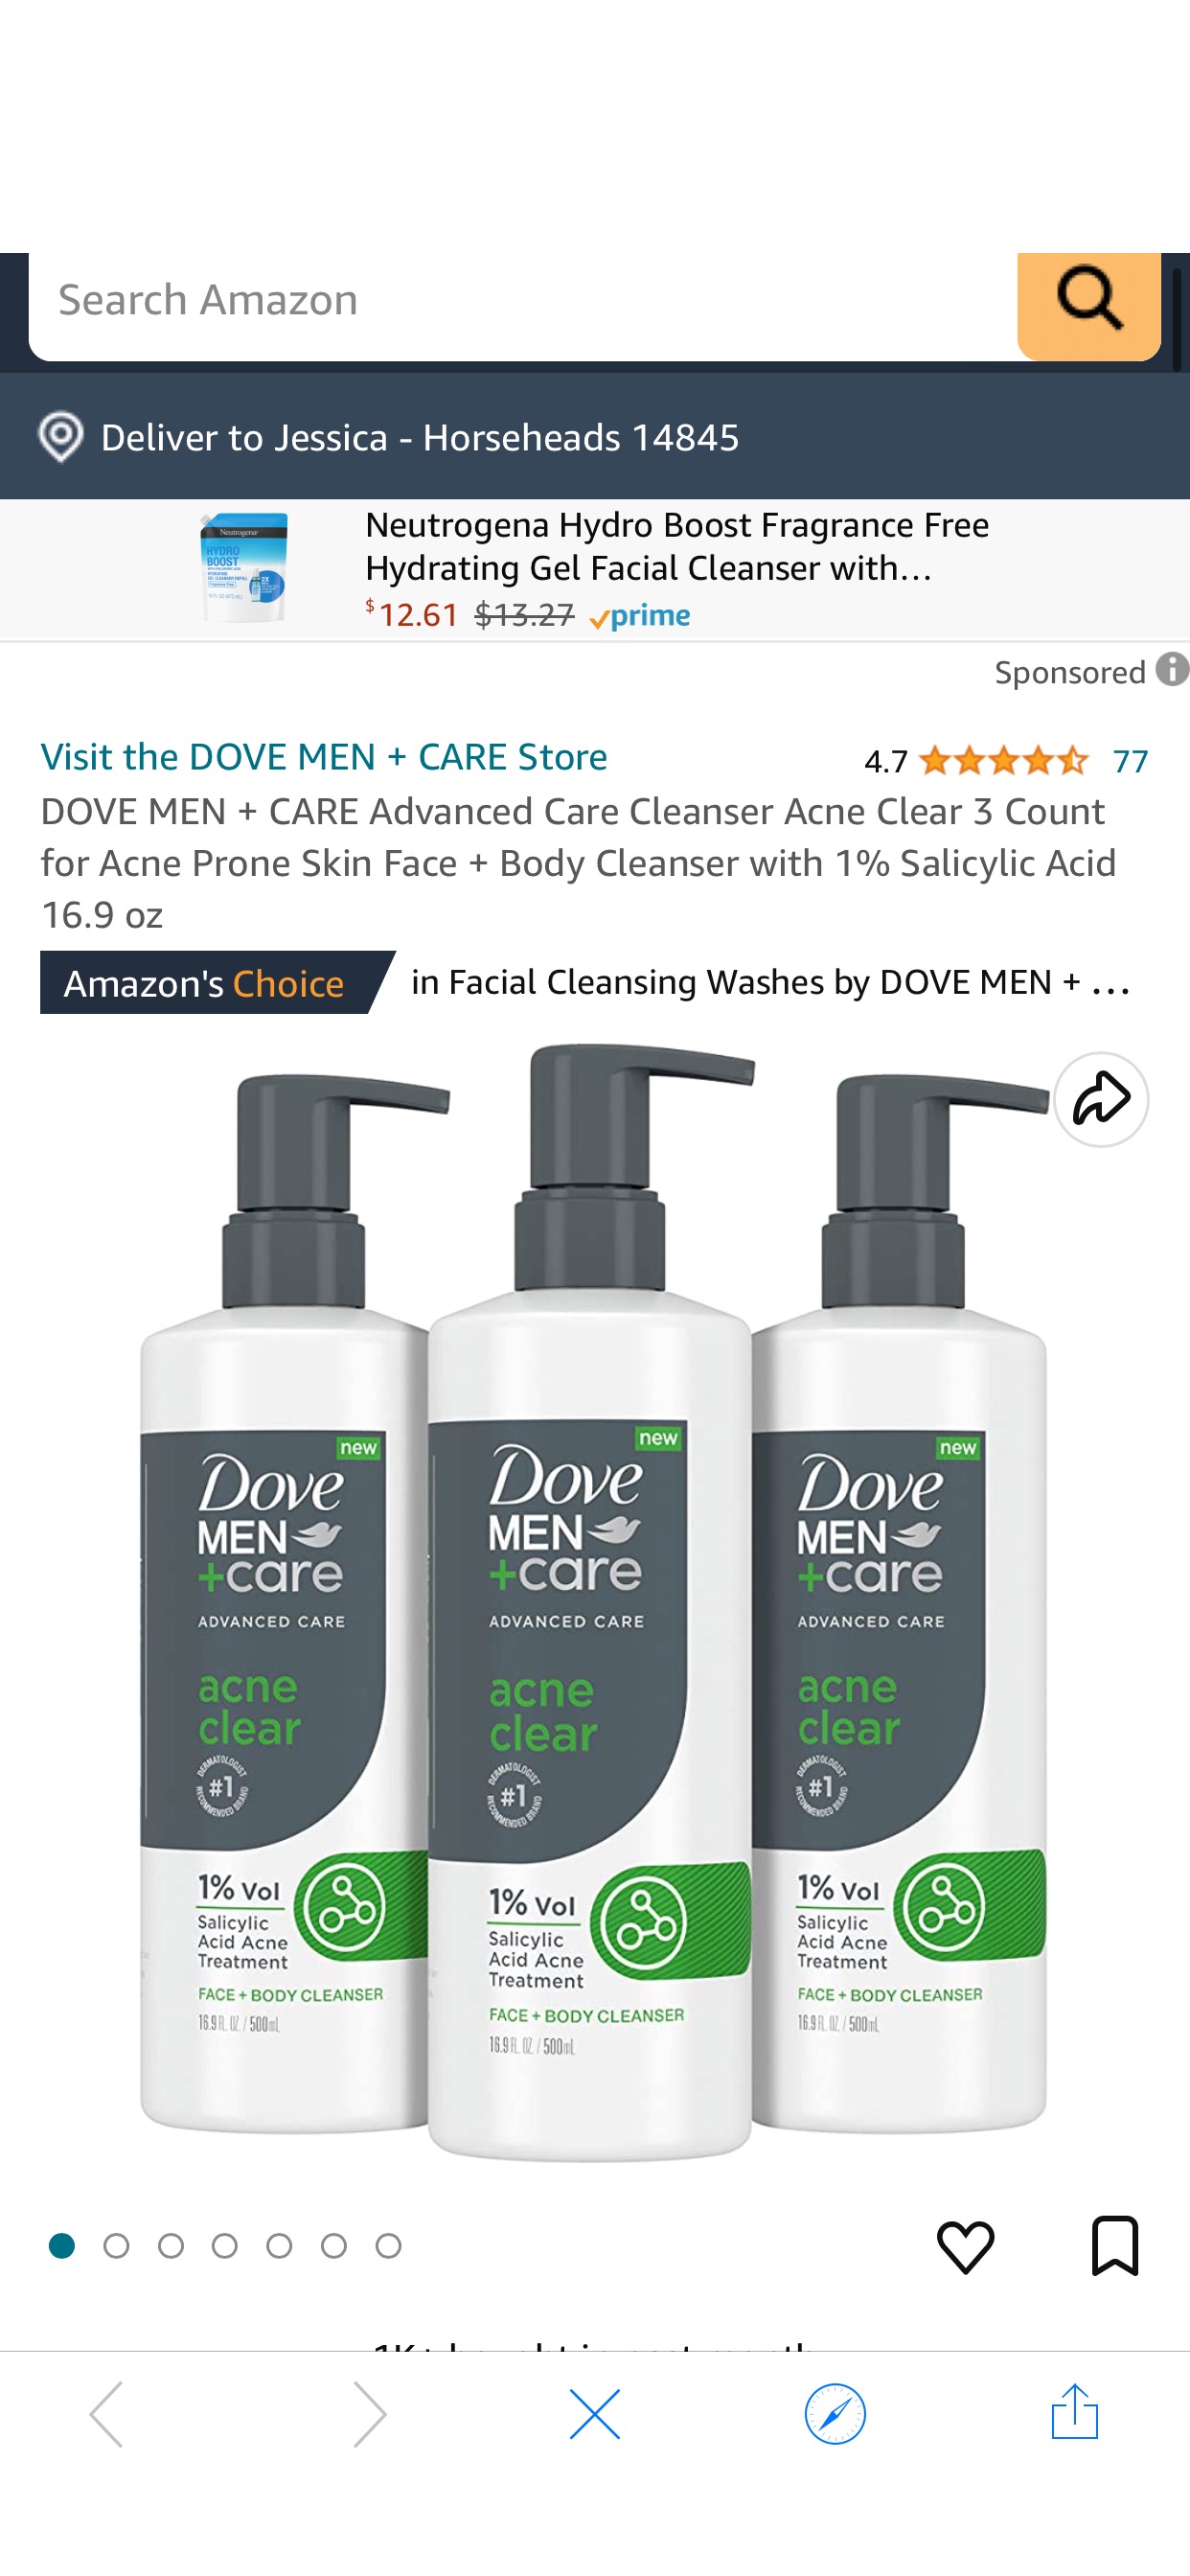 Amazon.com: DOVE MEN + CARE Advanced Care Cleanser Acne Clear 3 Count for Acne Prone Skin Face + Body Cleanser with 1% Salicylic Acid 16.9 oz : Beauty & Personal Care